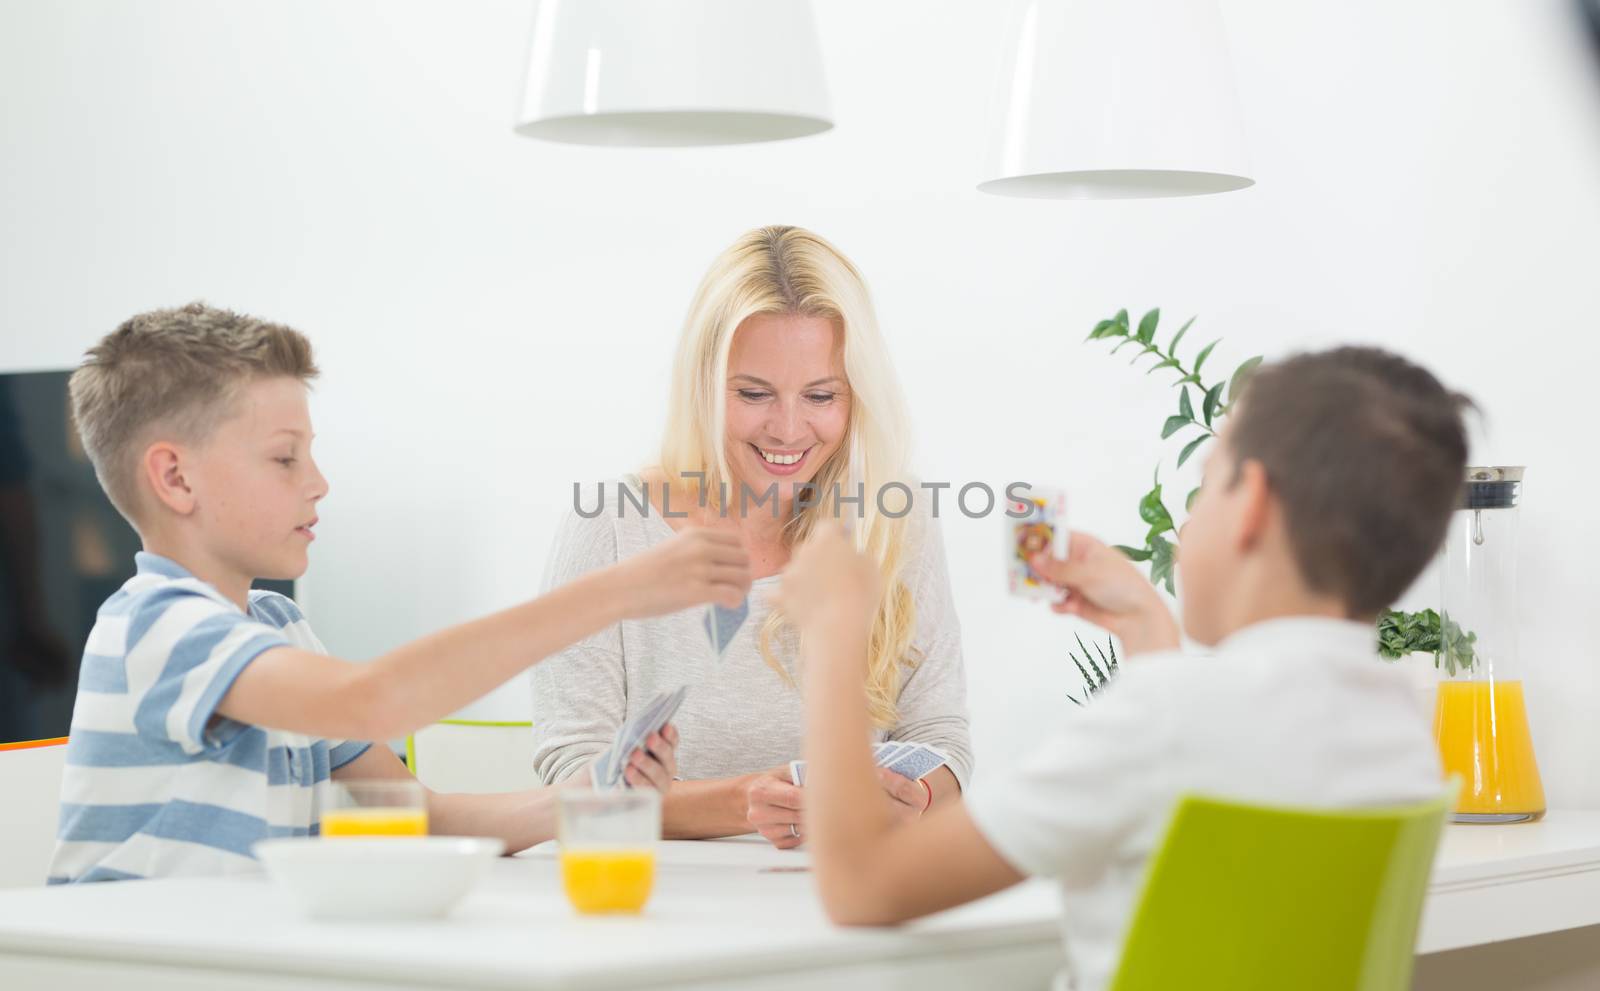 Mother and two kids playing card game at dining table at bright modern home. Spending quality leisure time with children and family concept. Cards are generic and debranded.